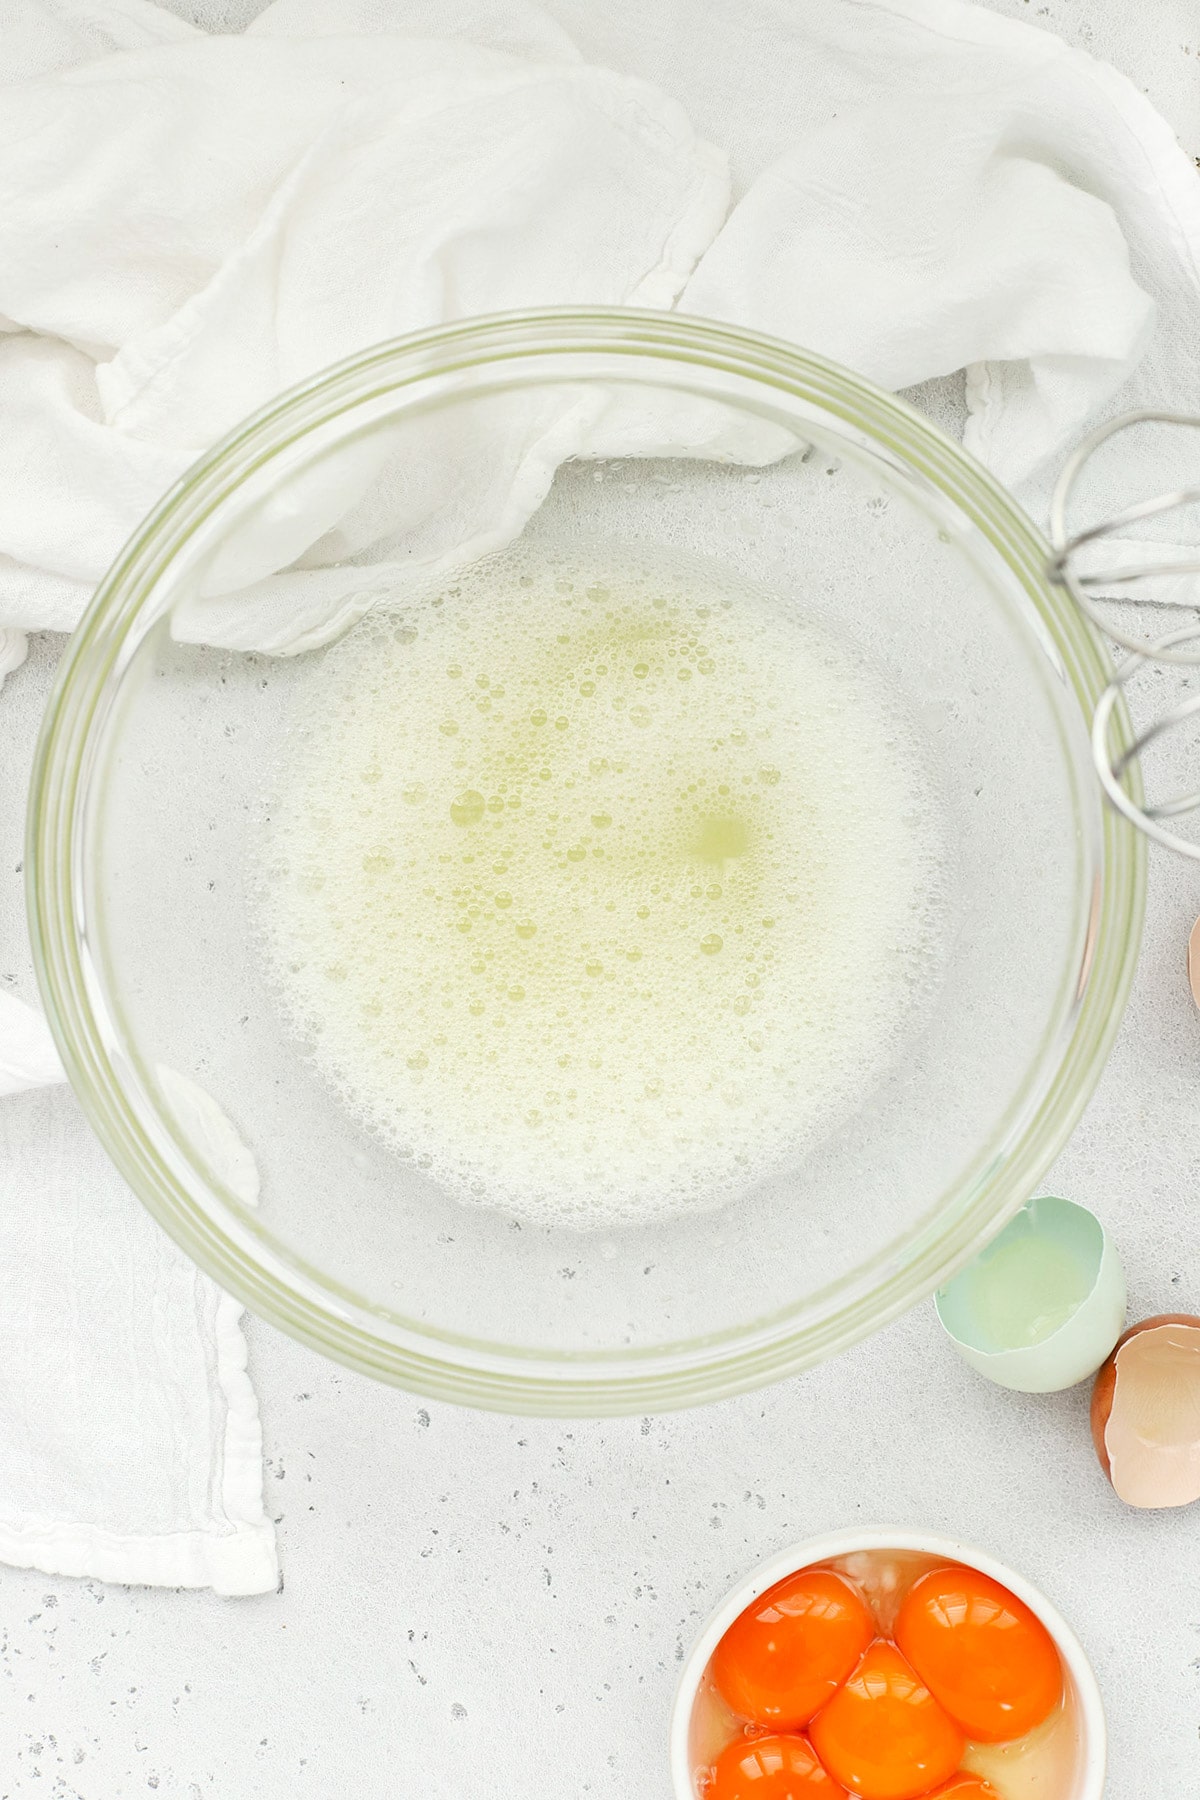 Foamy egg whites in a glass bowl